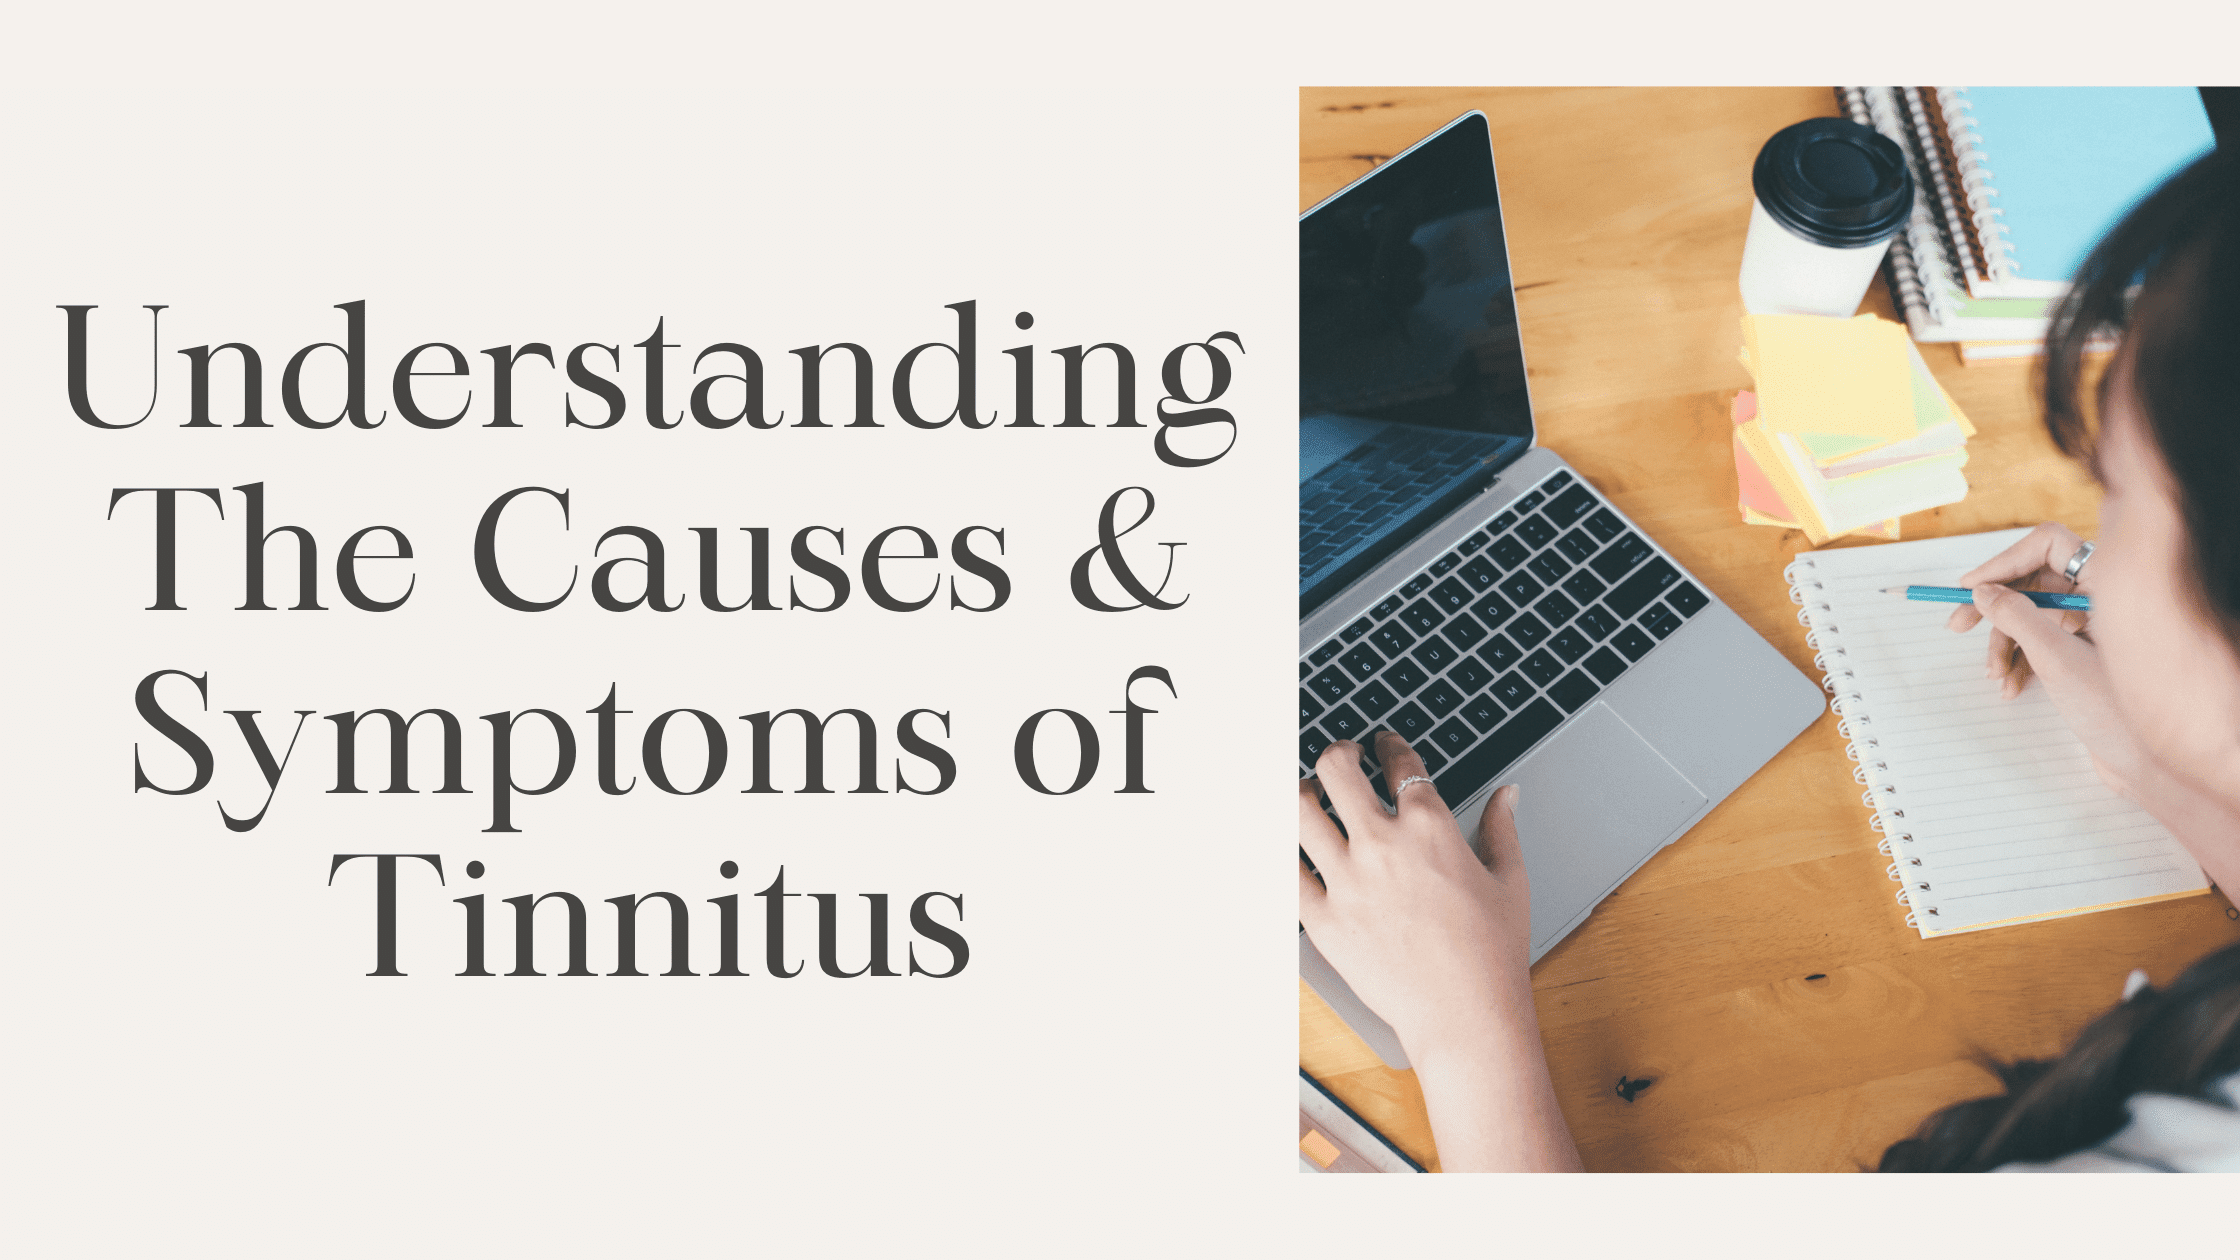 Featured image for “Understanding The Causes & Symptoms of Tinnitus”